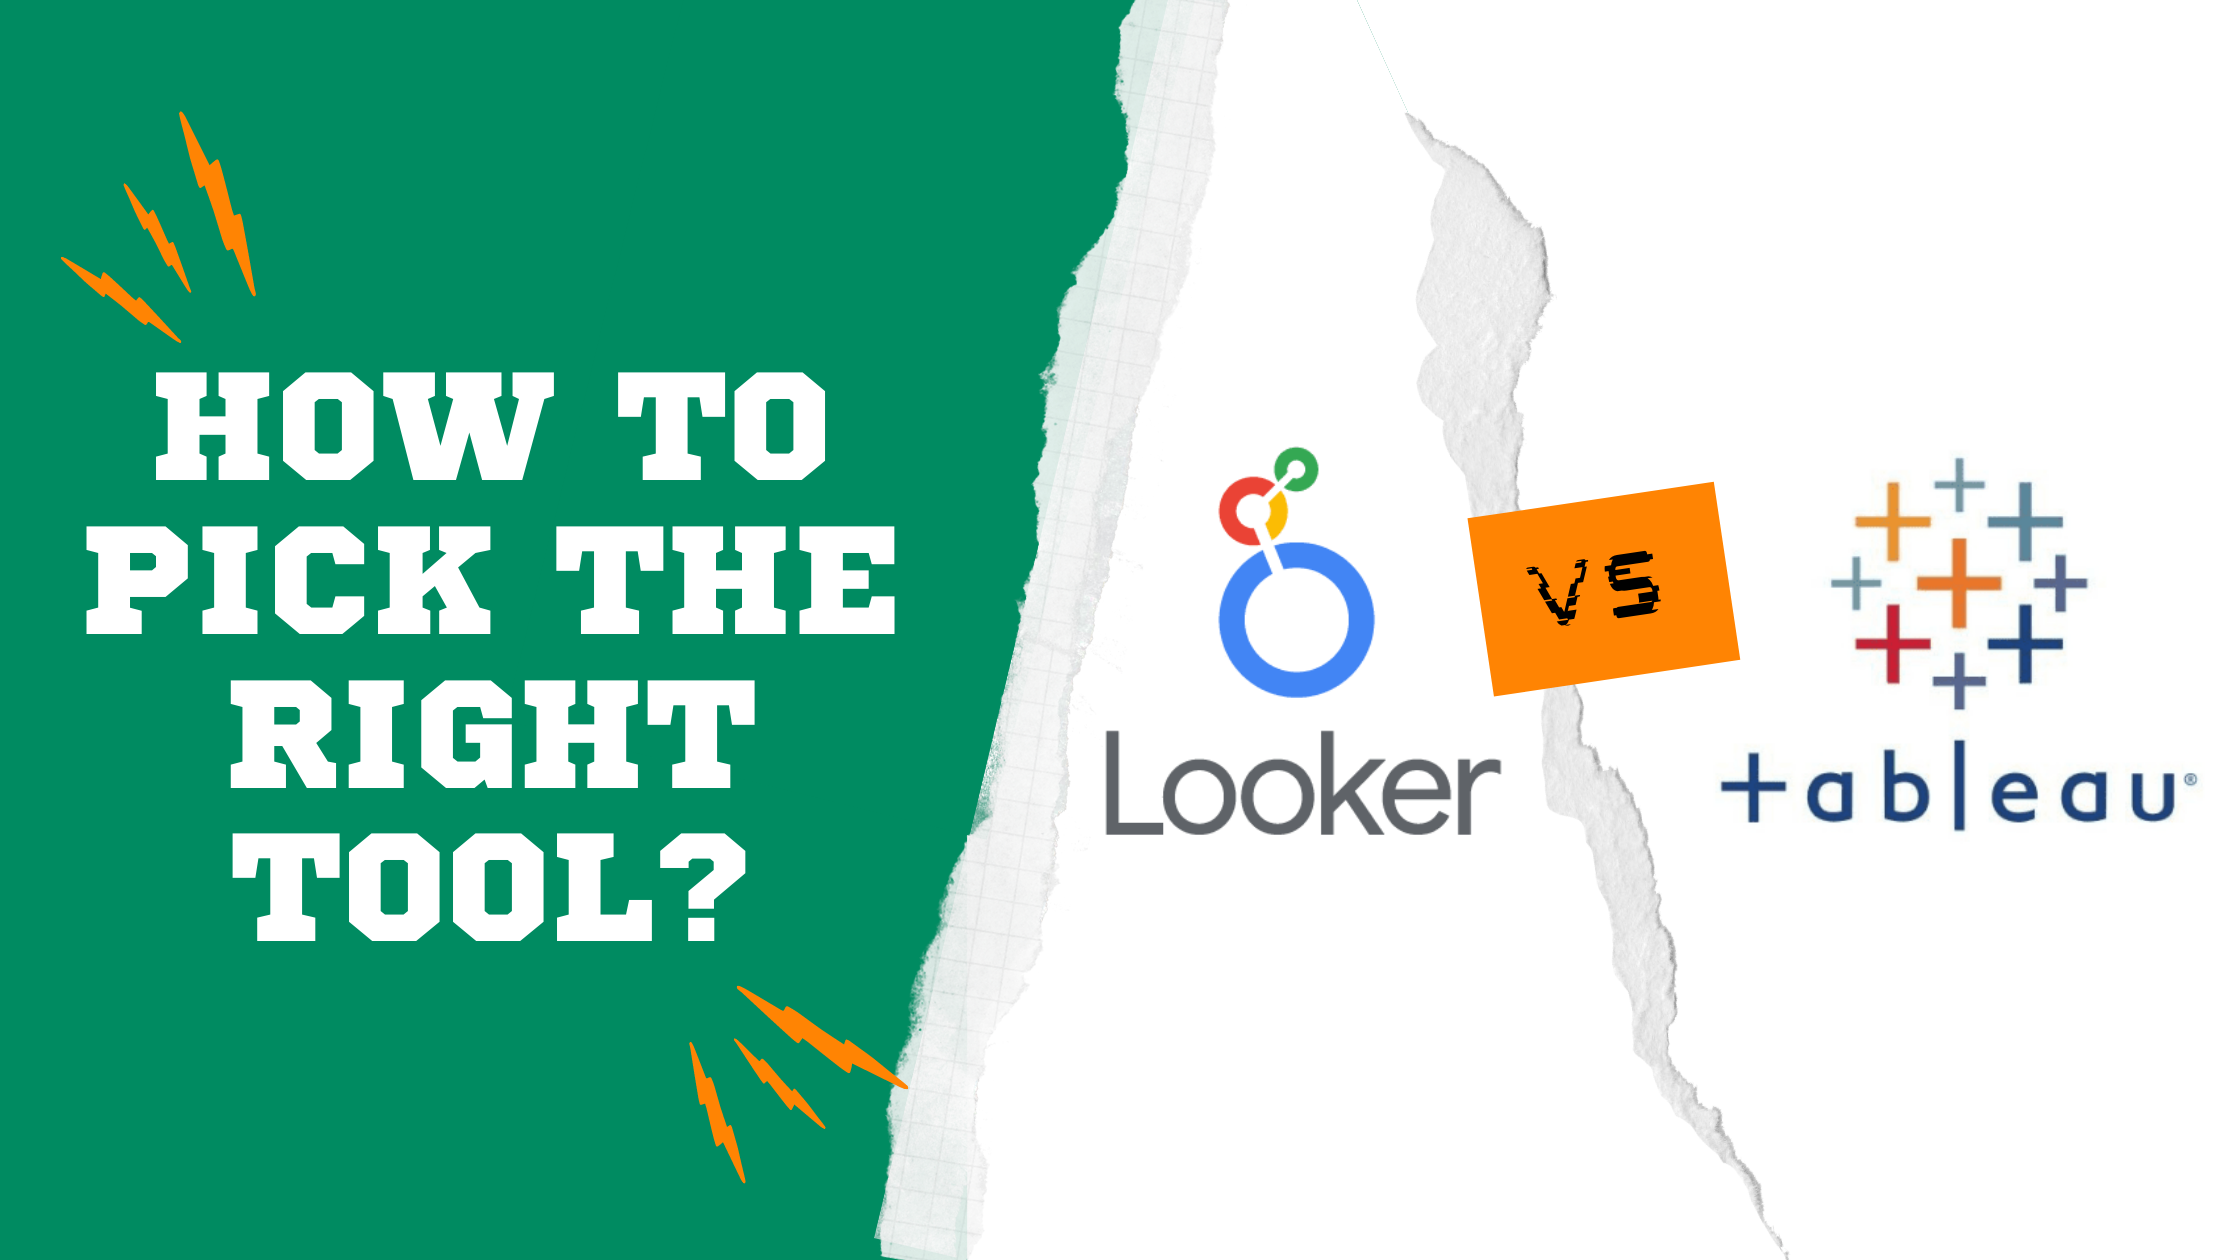 Looker VS Tableau: A Comparative Analysis to Help You Pick the Right Tool